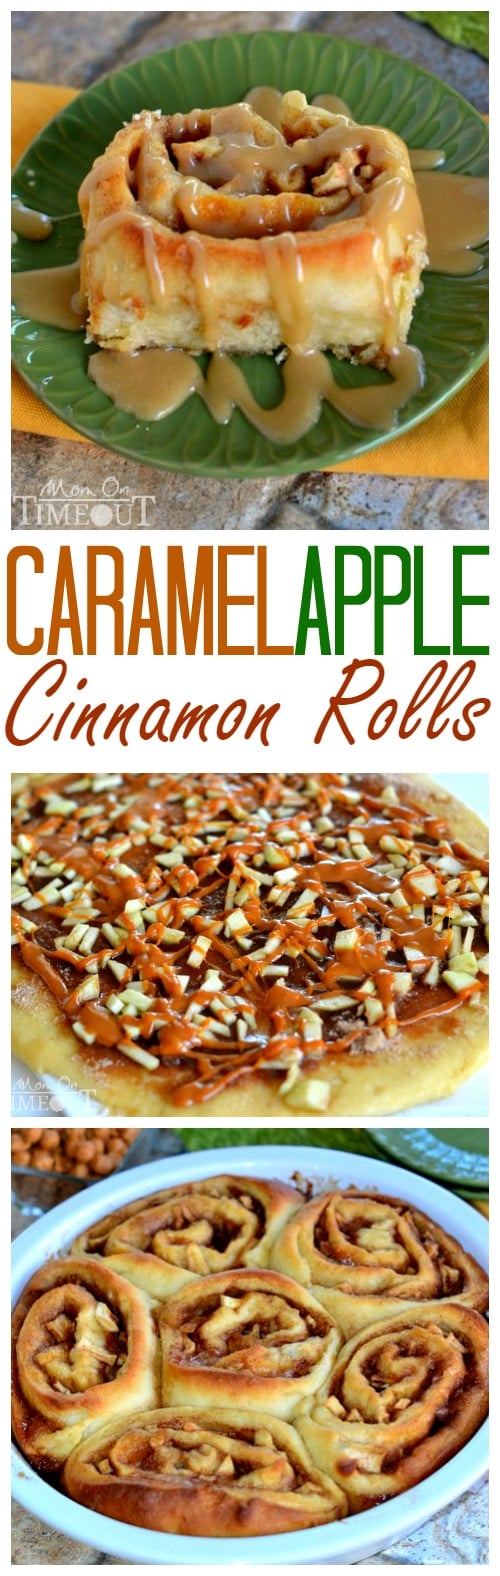 Craving caramel apples? Try these Caramel Apple Cinnamon Rolls for a sweetly satisfying breakfast treat! These gorgeous rolls are topped with a mouth-watering caramel icing and filled with Granny Smith apples and caramel. | MomOnTimeout.com | #fall #breakfast #recipe #caramel #apple